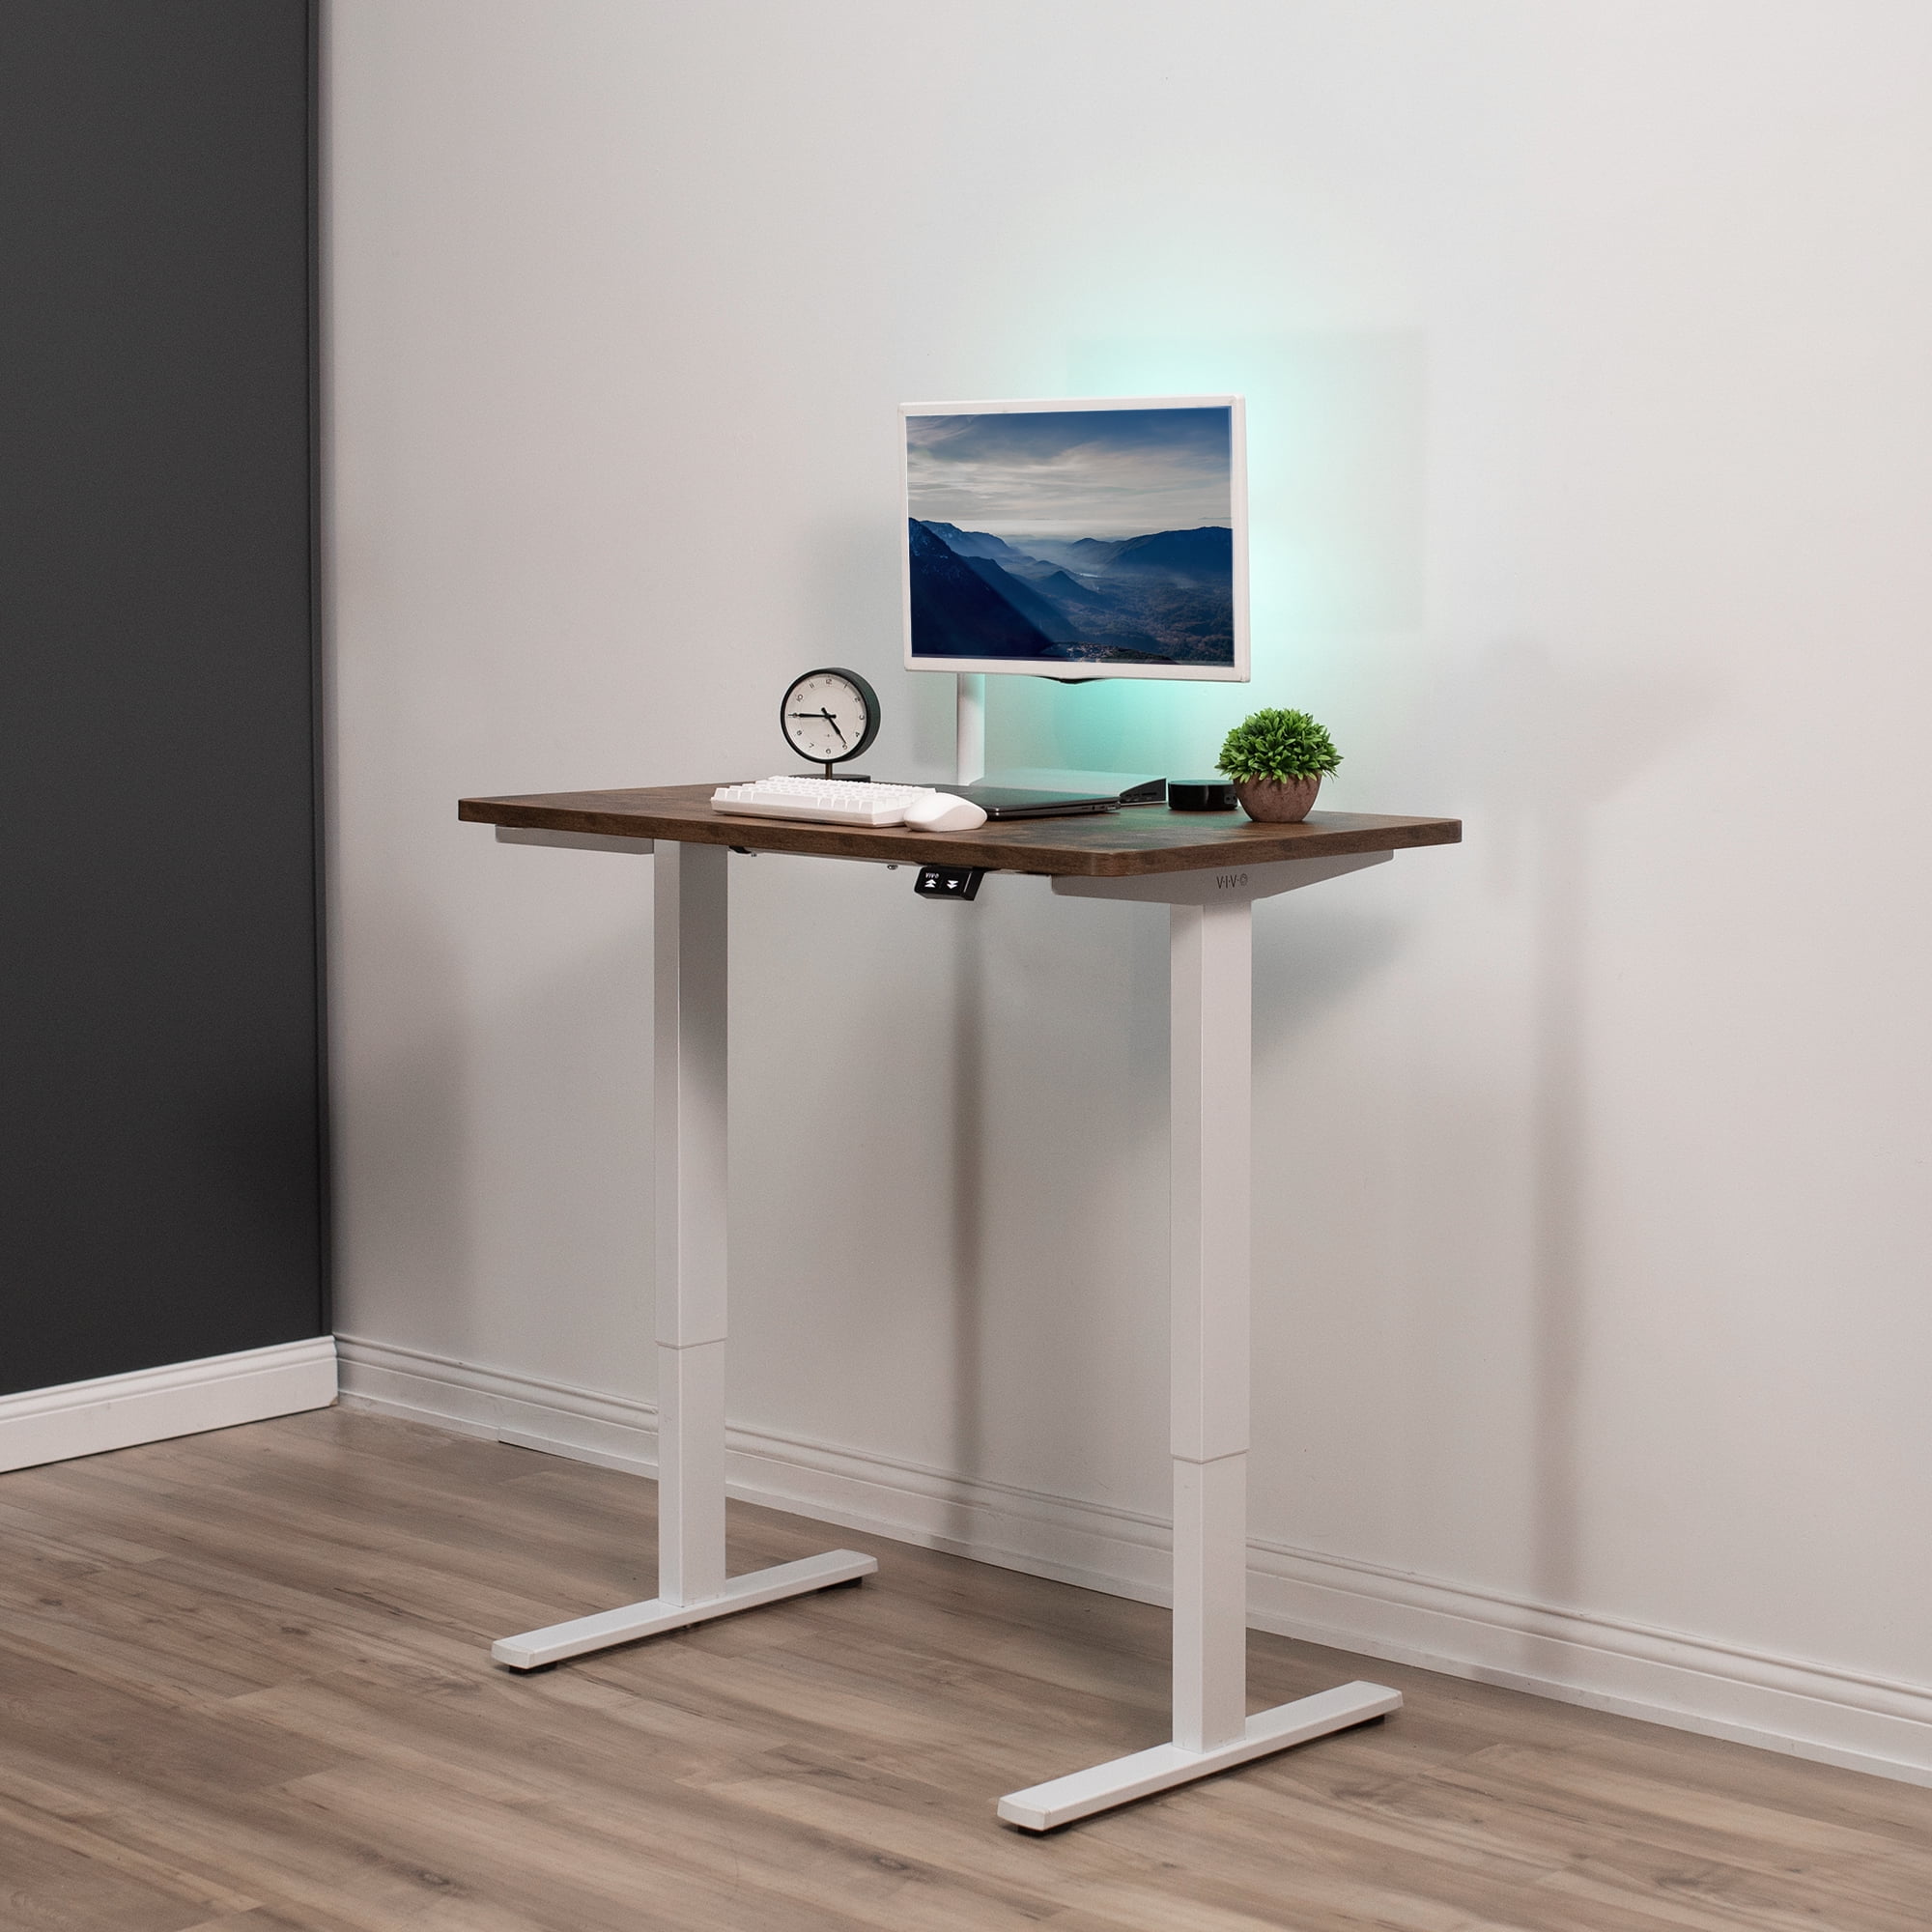 VIVO White 43 x 24 inch Universal Table Top for Sit to Stand Desk